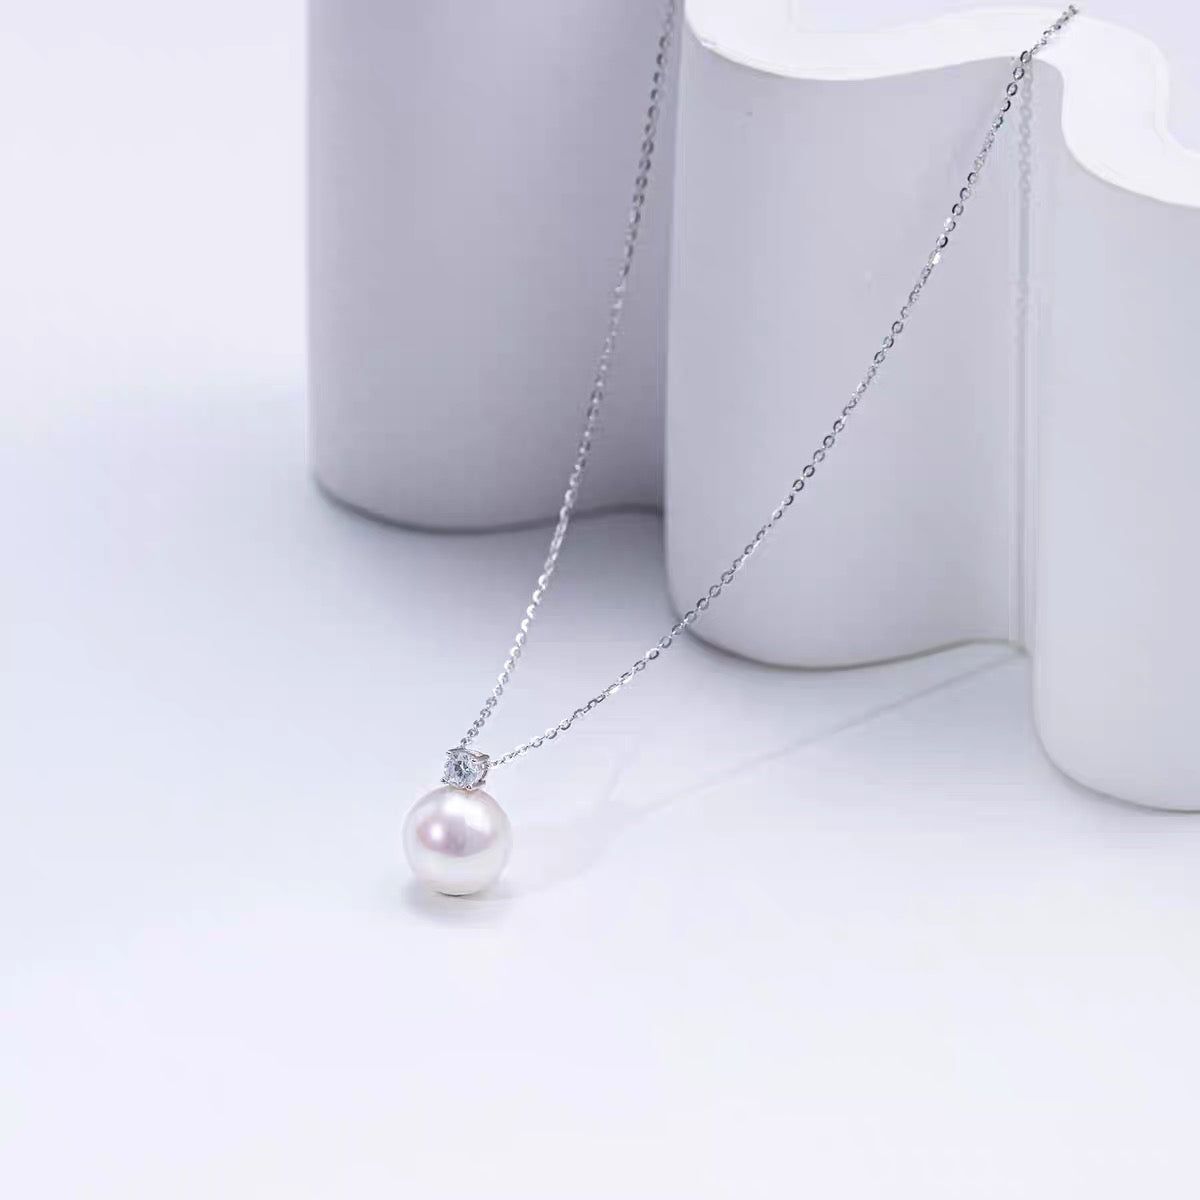 10.0-11.0 mm AAA White Freshwater Pearl and Diamond Romantic Collection Pendant